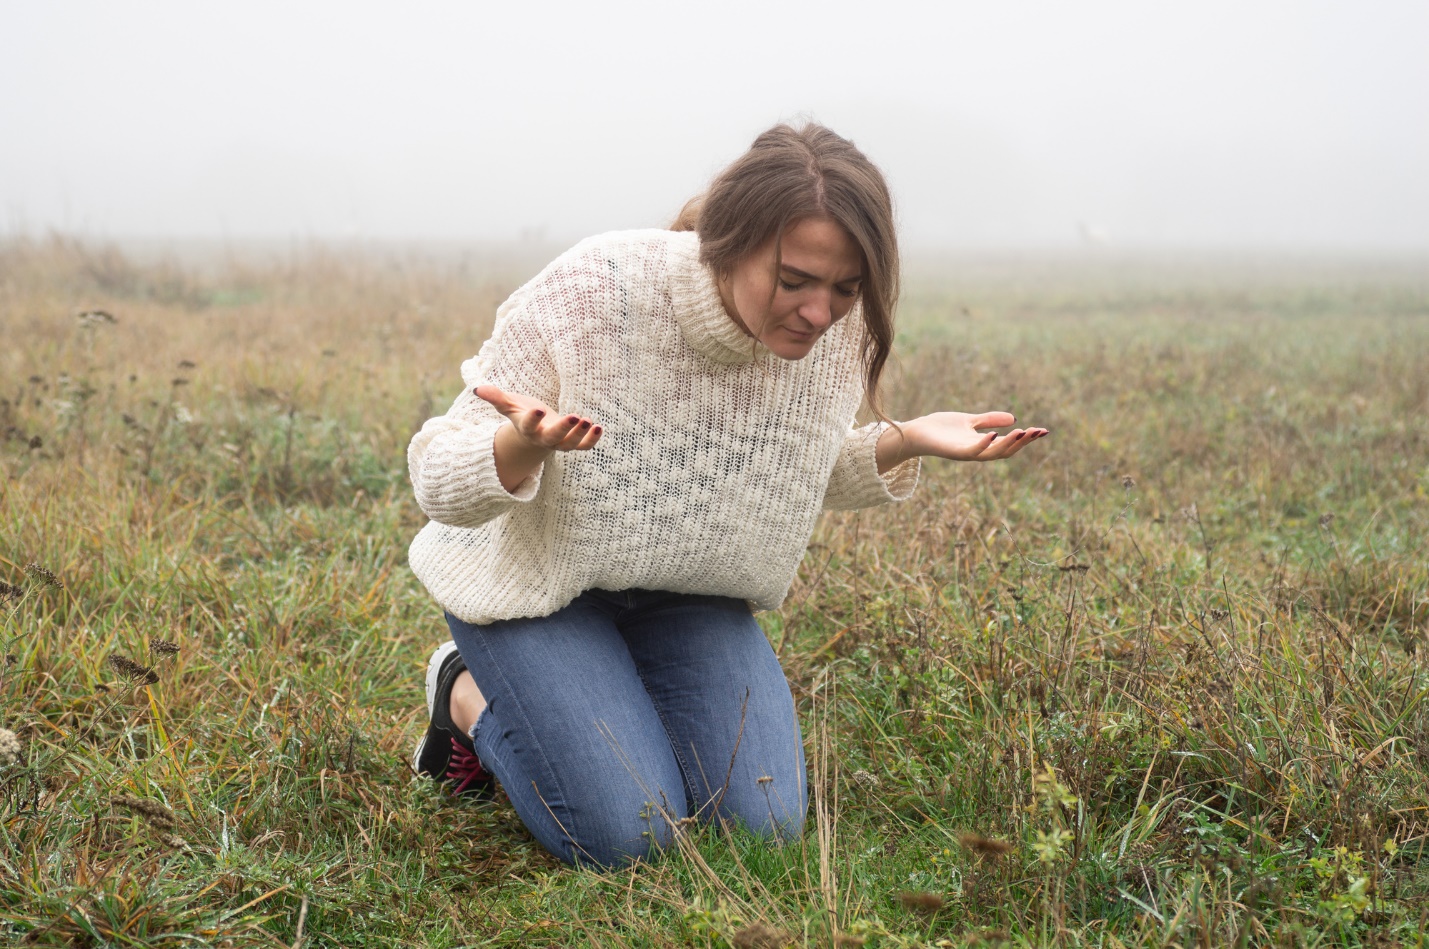 A person kneeling in grass with her hands up

Description automatically generated with low confidence